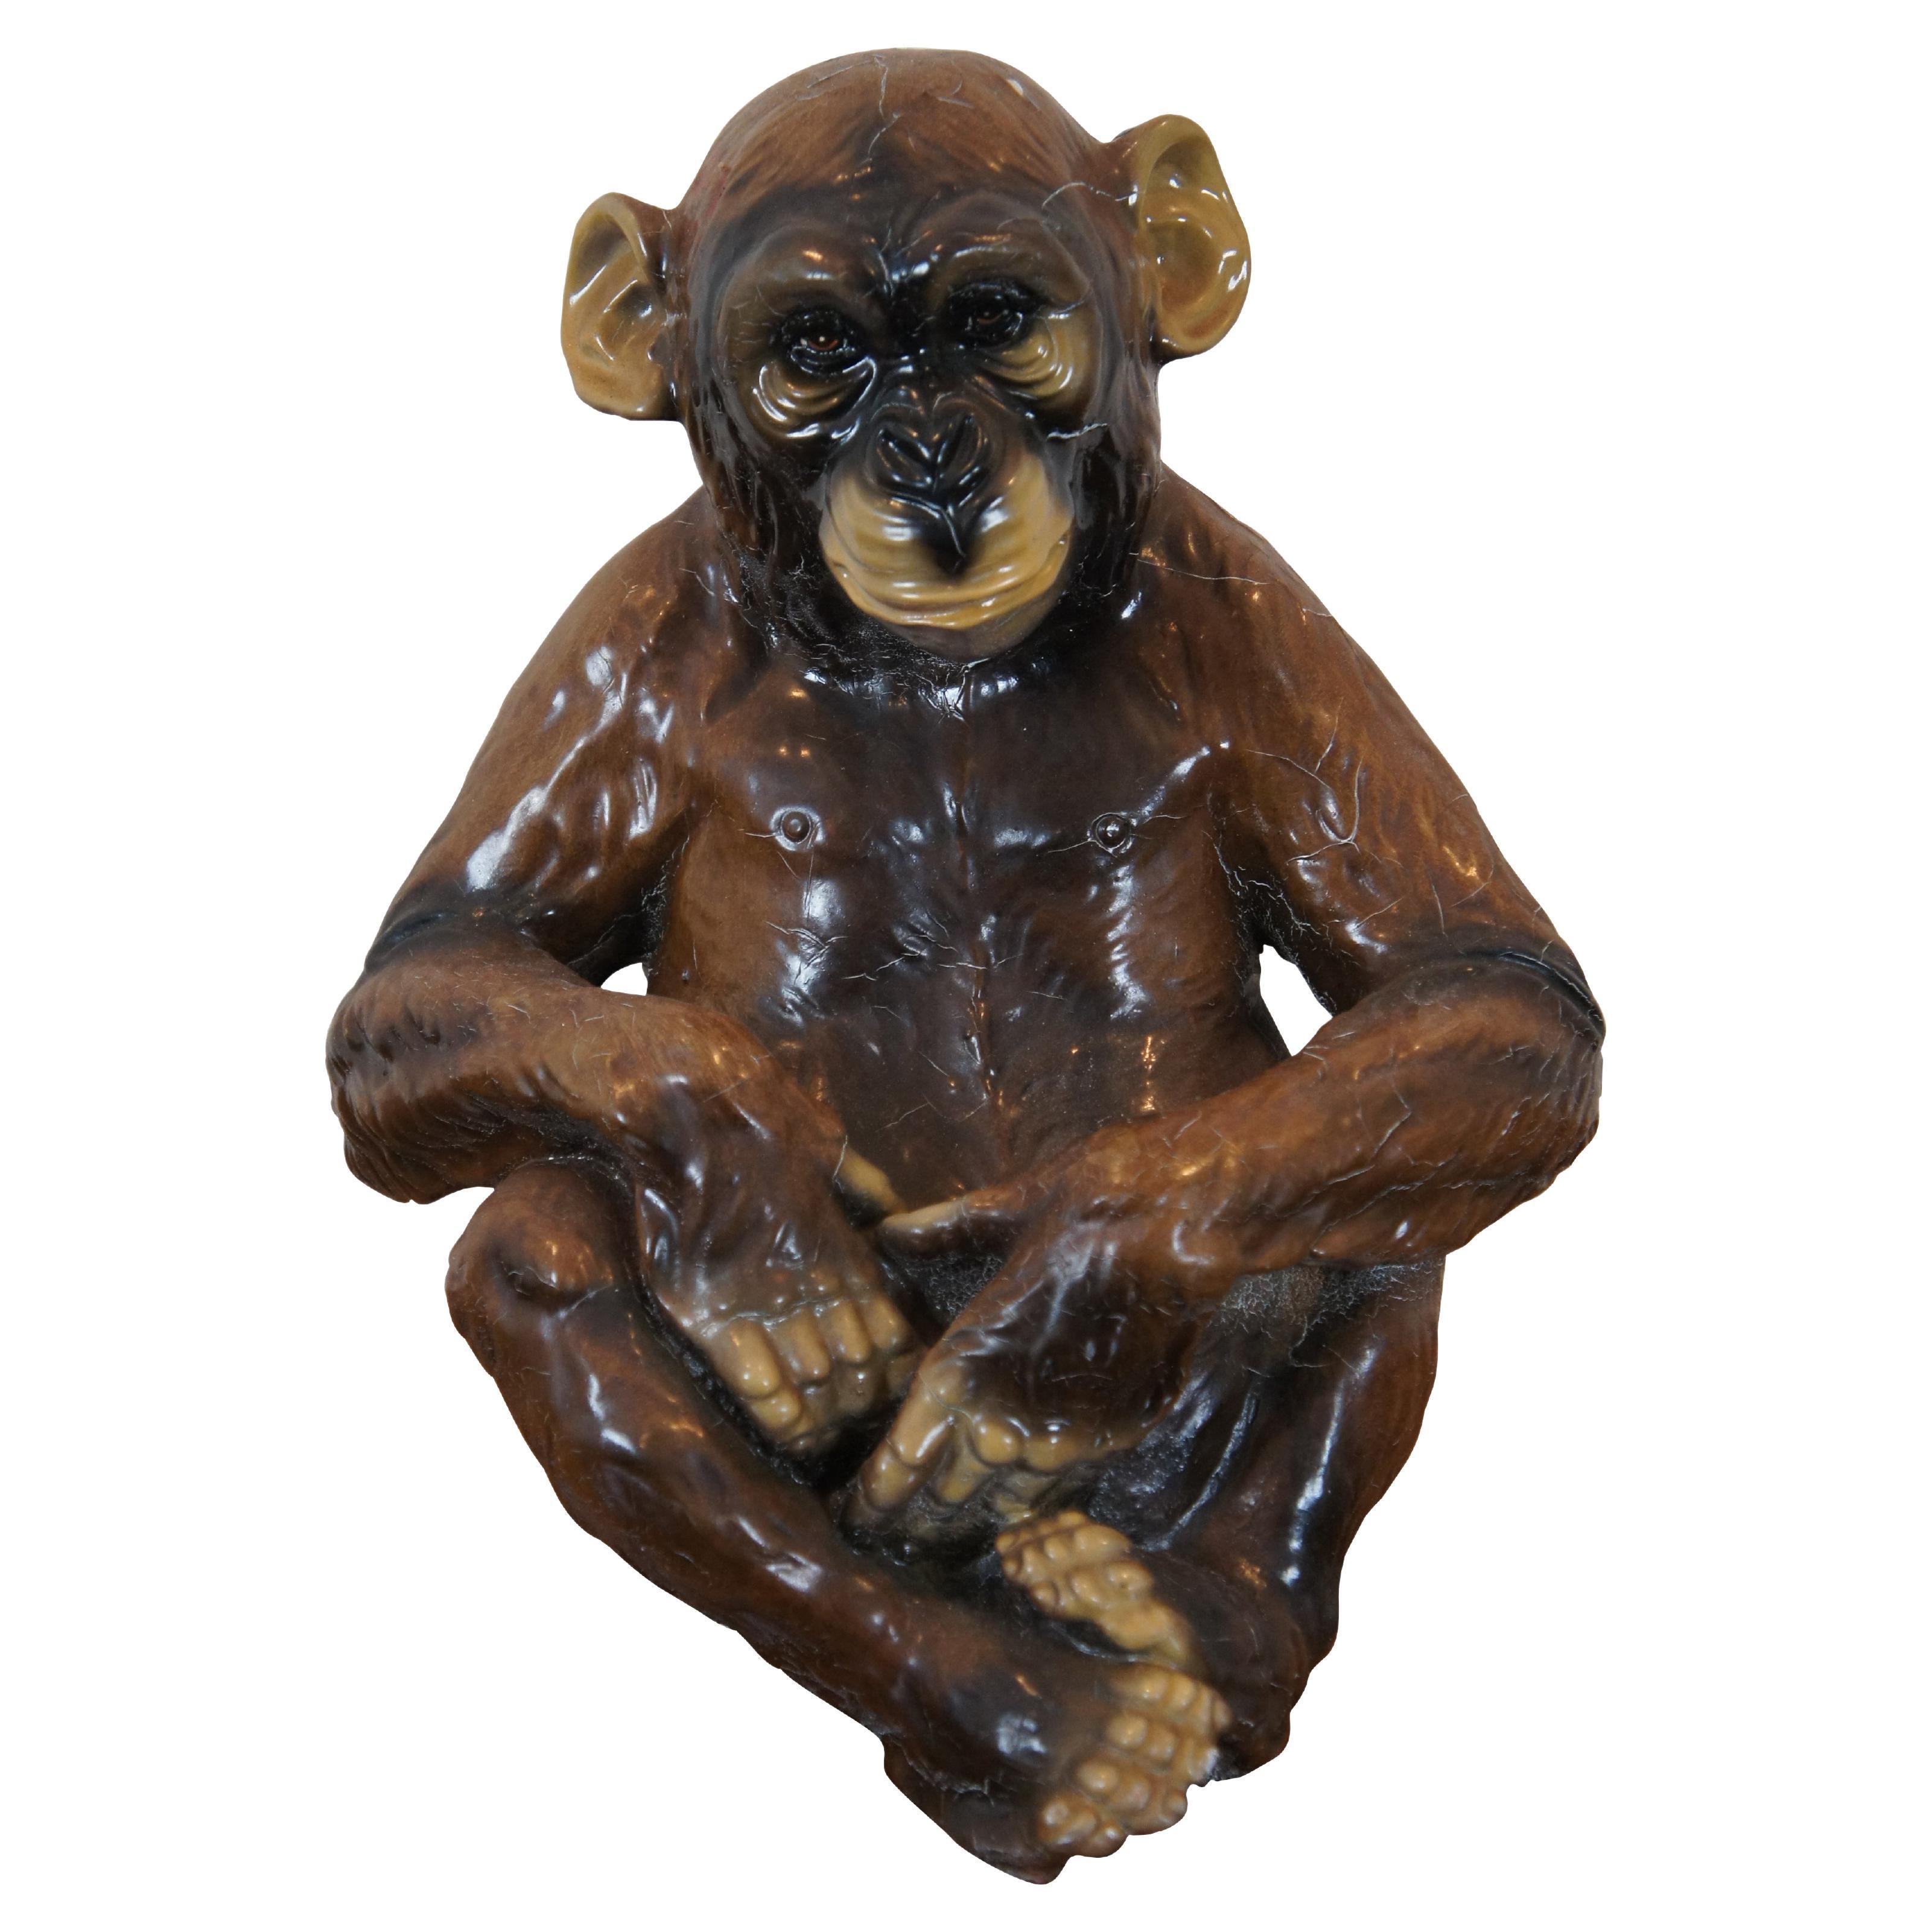 Rare Marwal Ind Inc Seated Chalkware Monkey Chimp Ape Sculpture Statue 13"